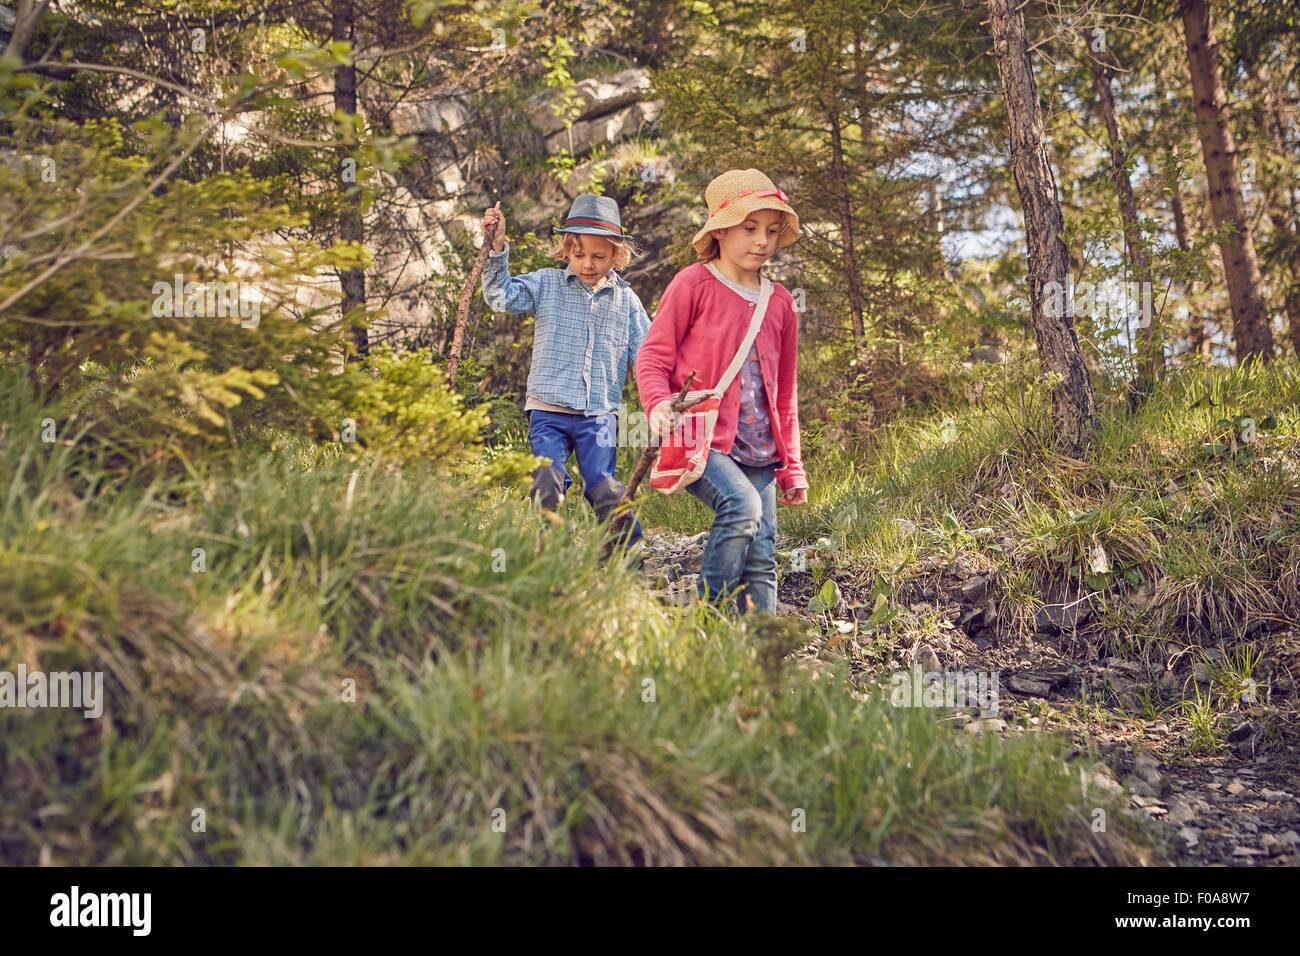 Two young children, exploring forest Stock Photo